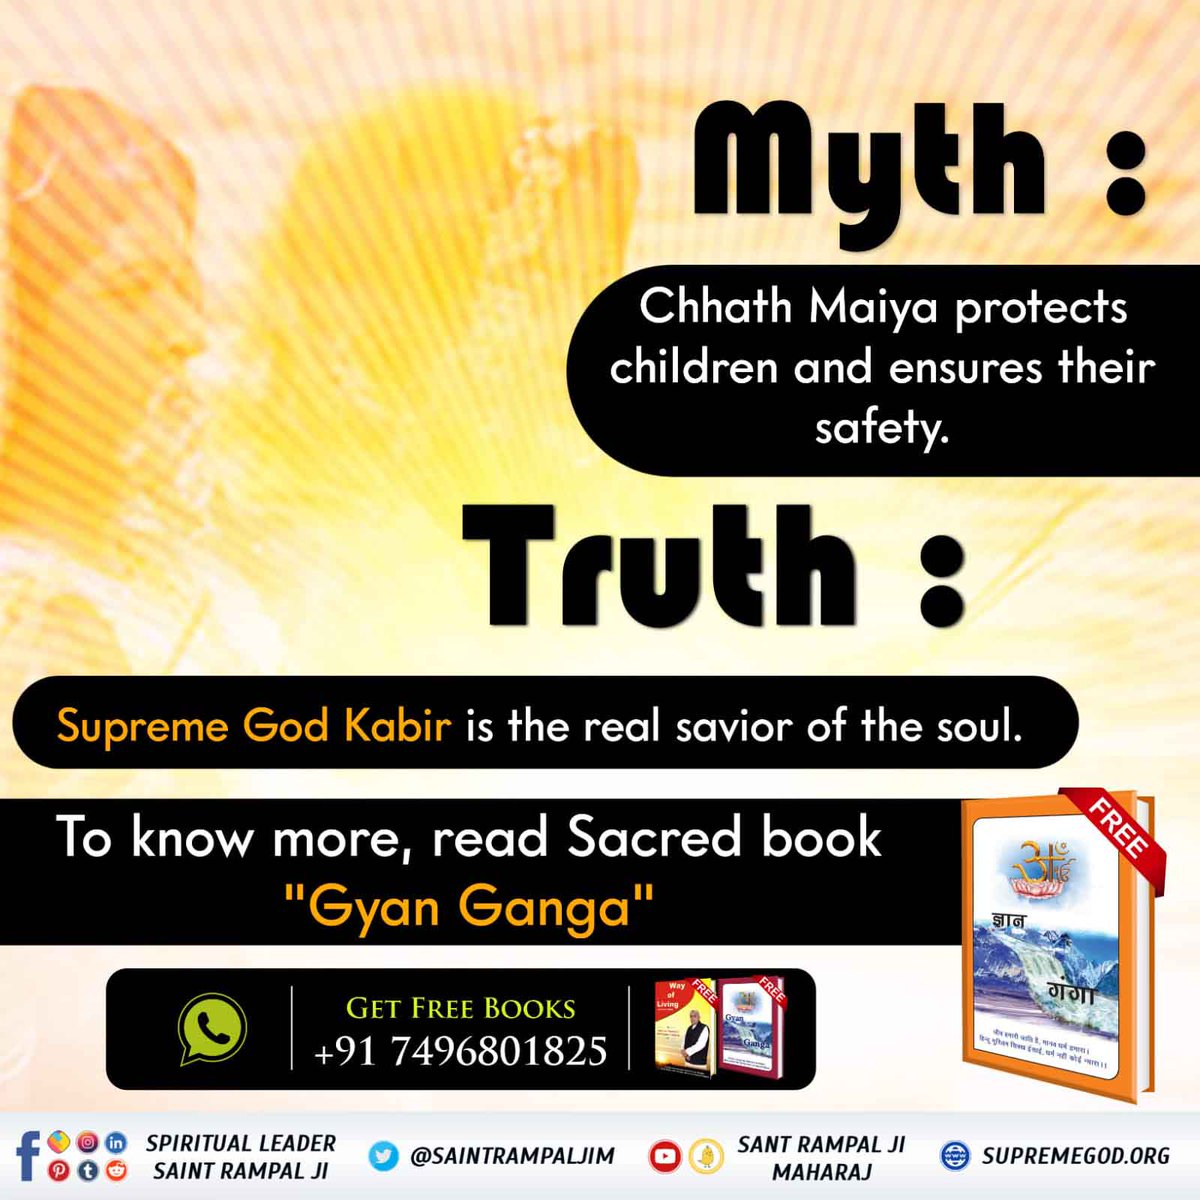 #KnowAboutChhathPujaAccording to Bhagavad Gita chapter 16:23, those who perform an arbitrary practice that is devoid of the injunctions of scriptures remain in the vicious cycle of birth-death and suffer in 84 lakh life births. To know more, read Sacred book @SaintRampalJiM